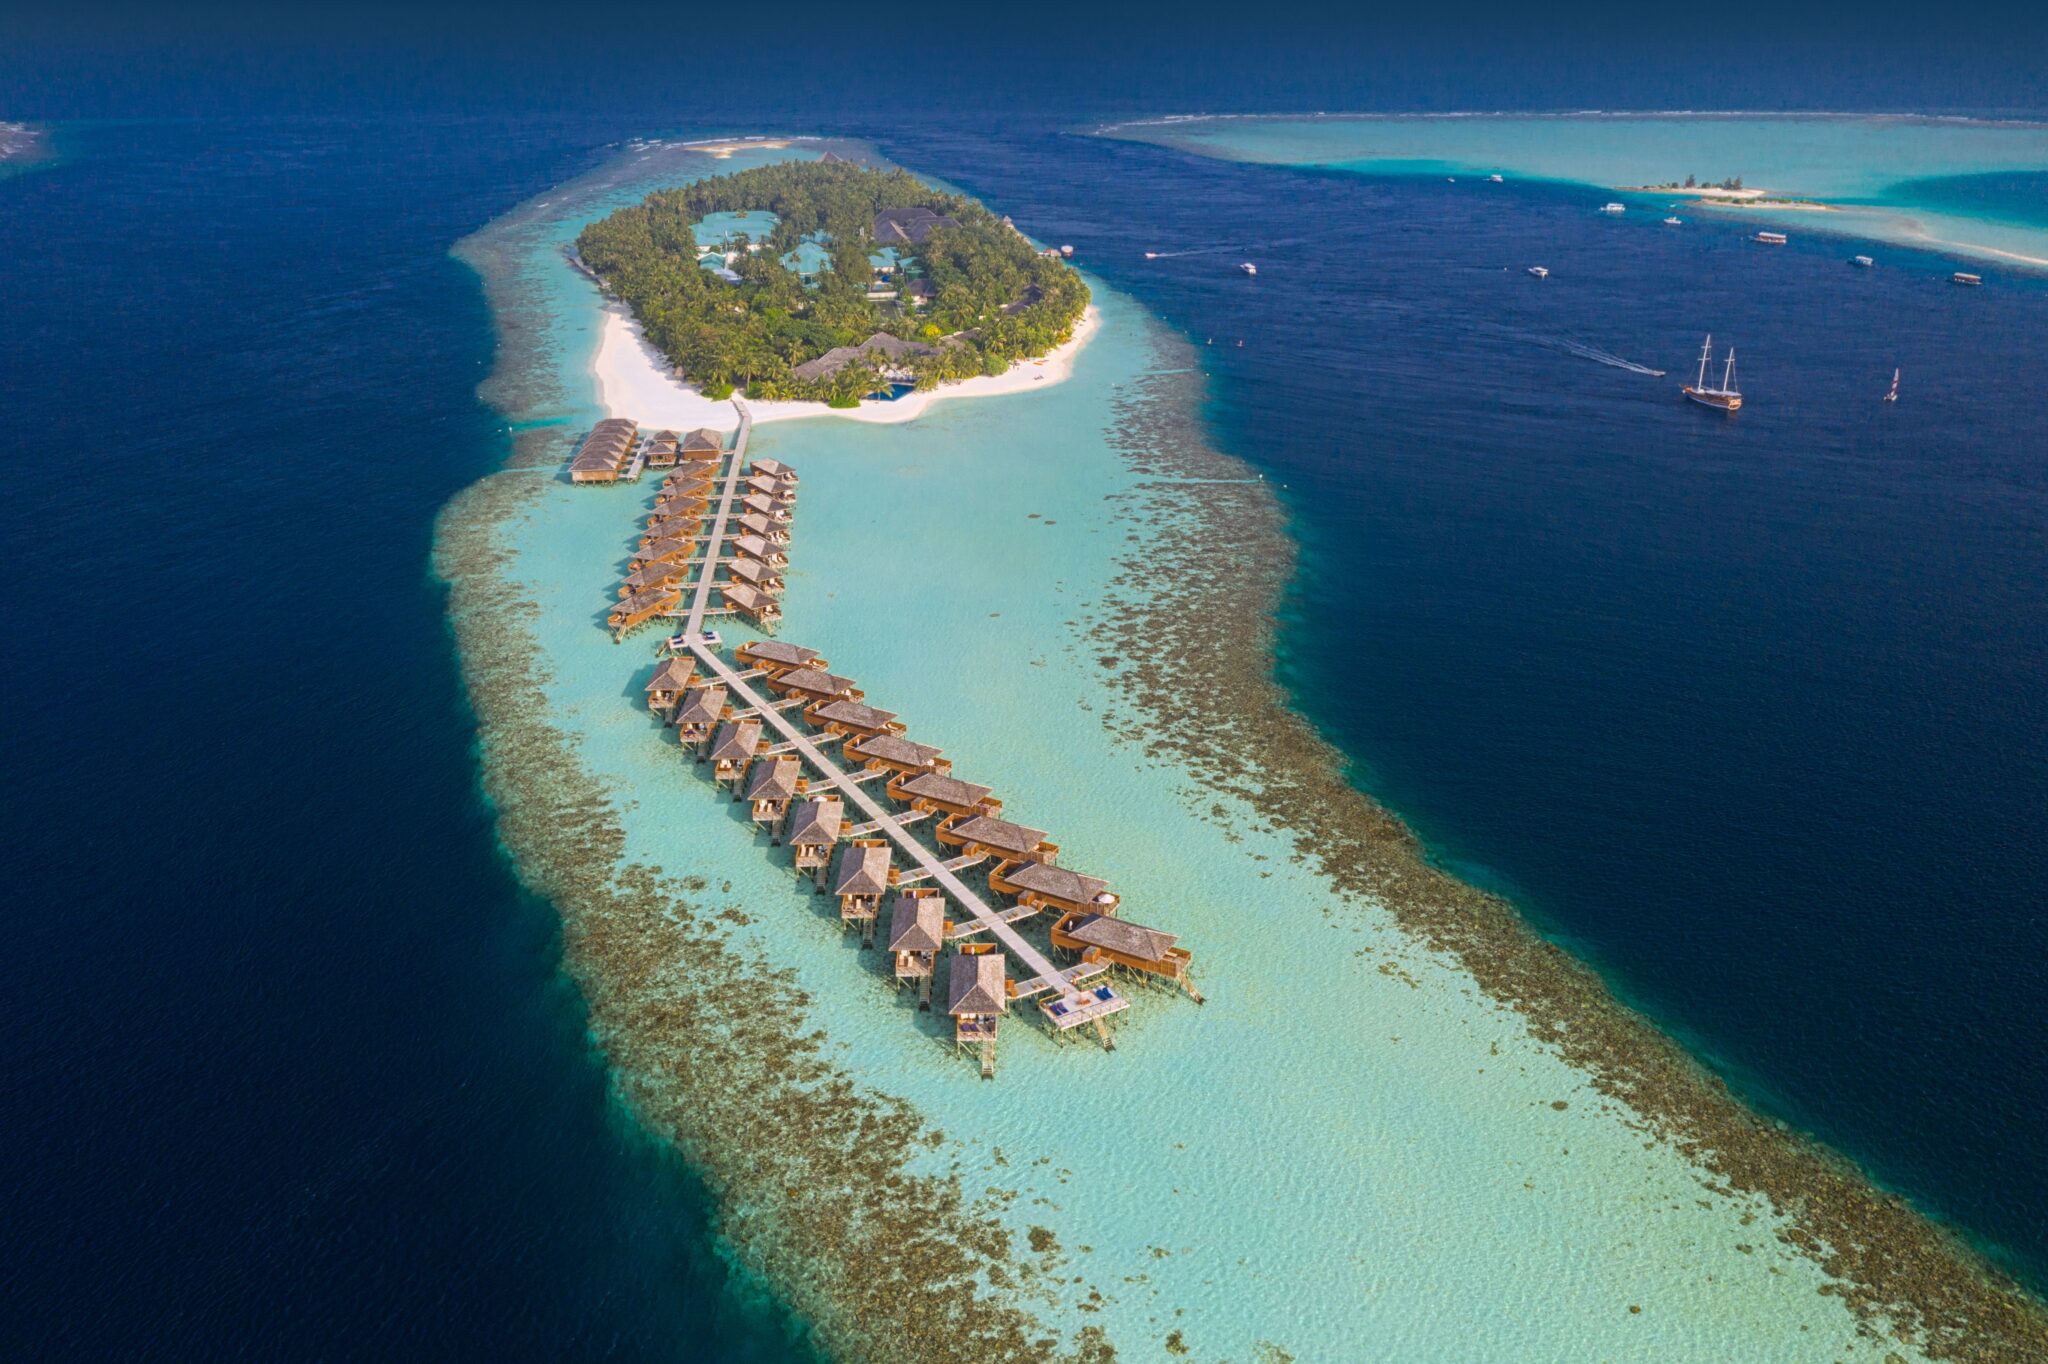 An aerial view of the Vilamendhoo Island Resort & Spa in the Maldives